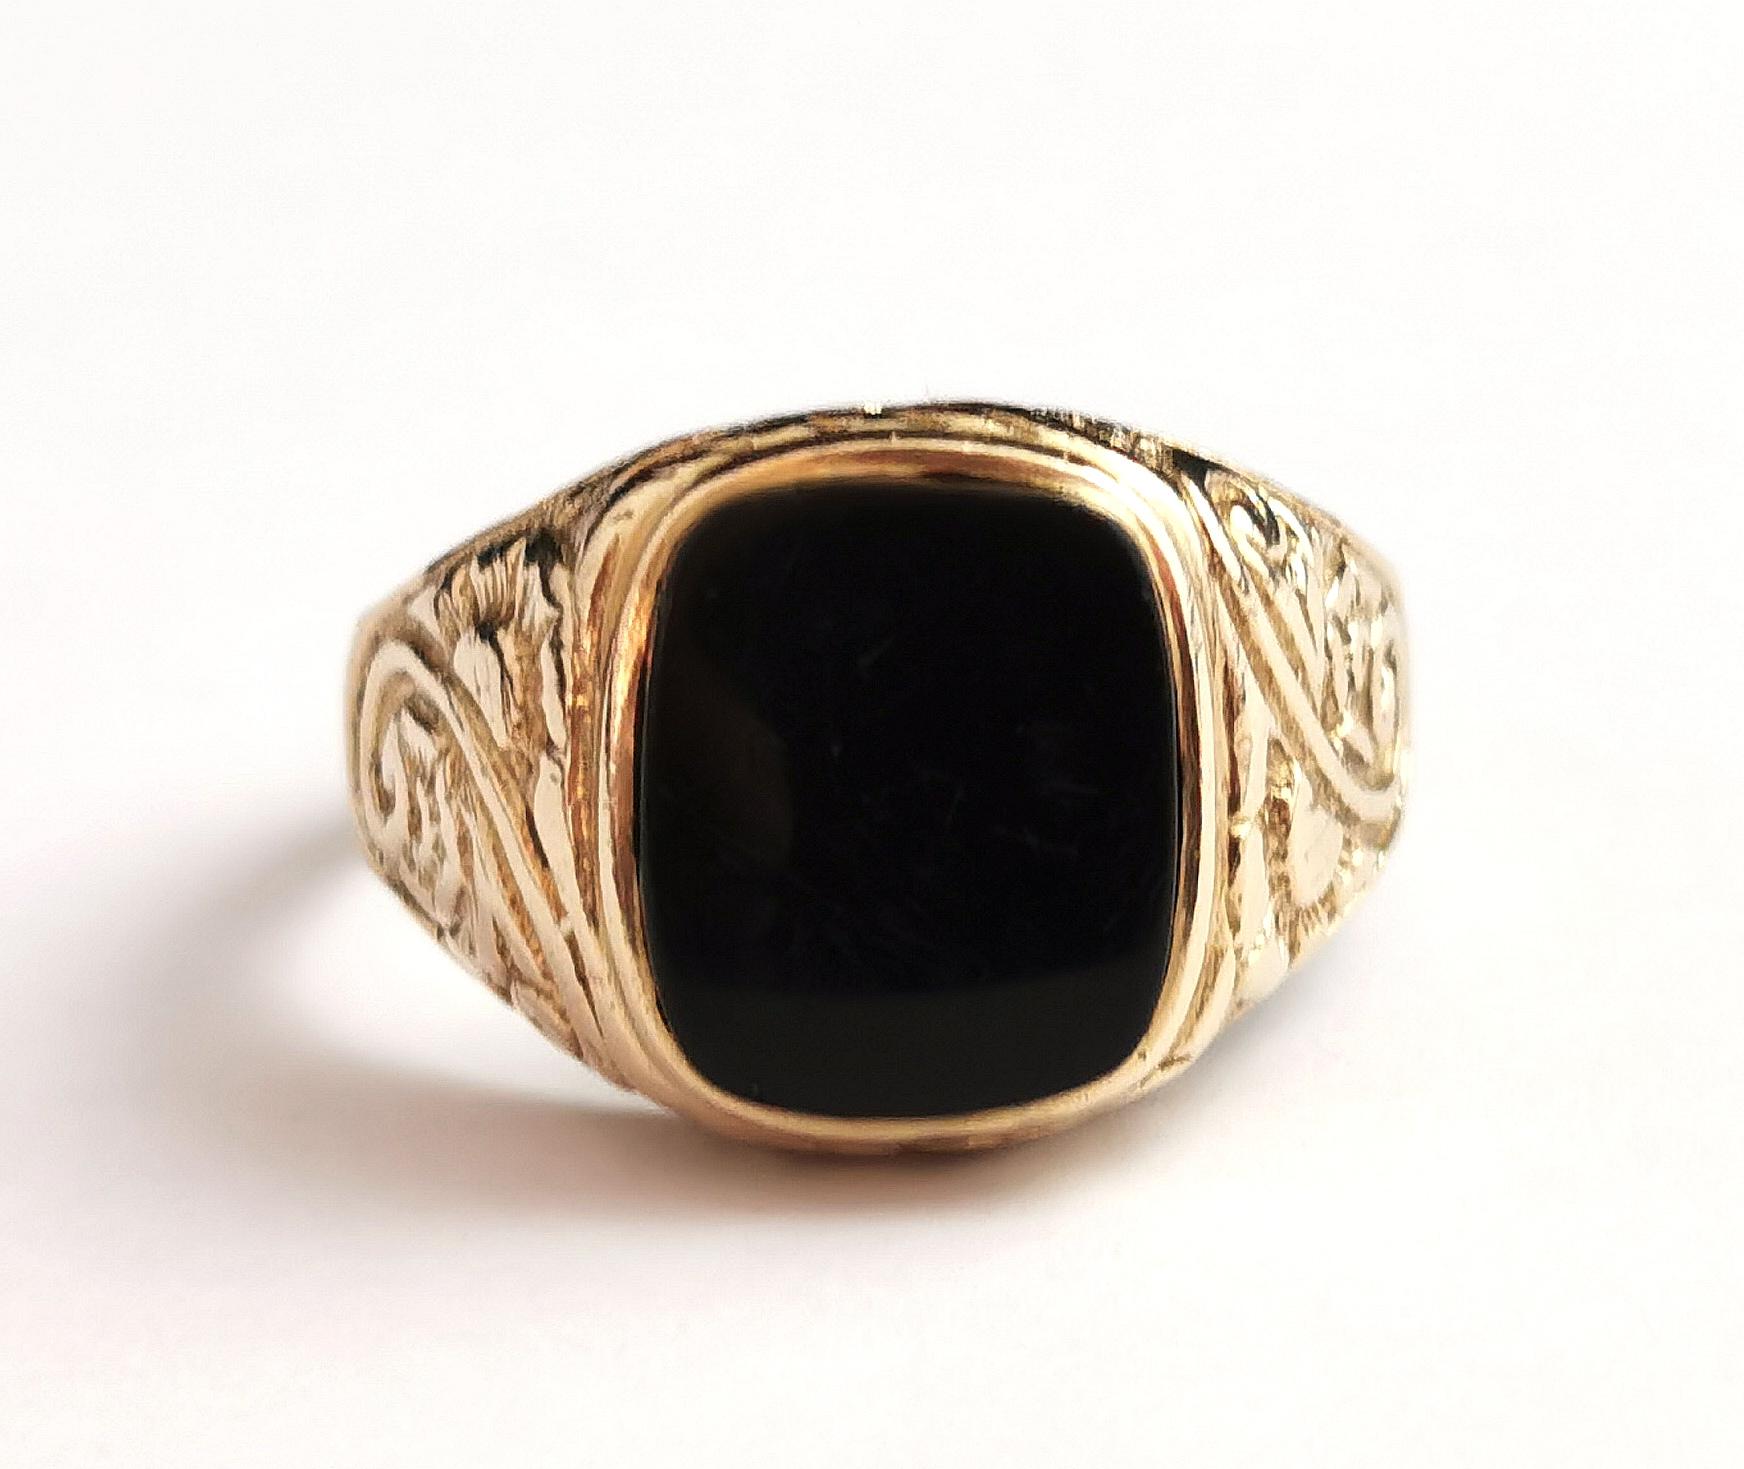 Vintage Onyx signet ring, 9k yellow gold, floral engraved  5